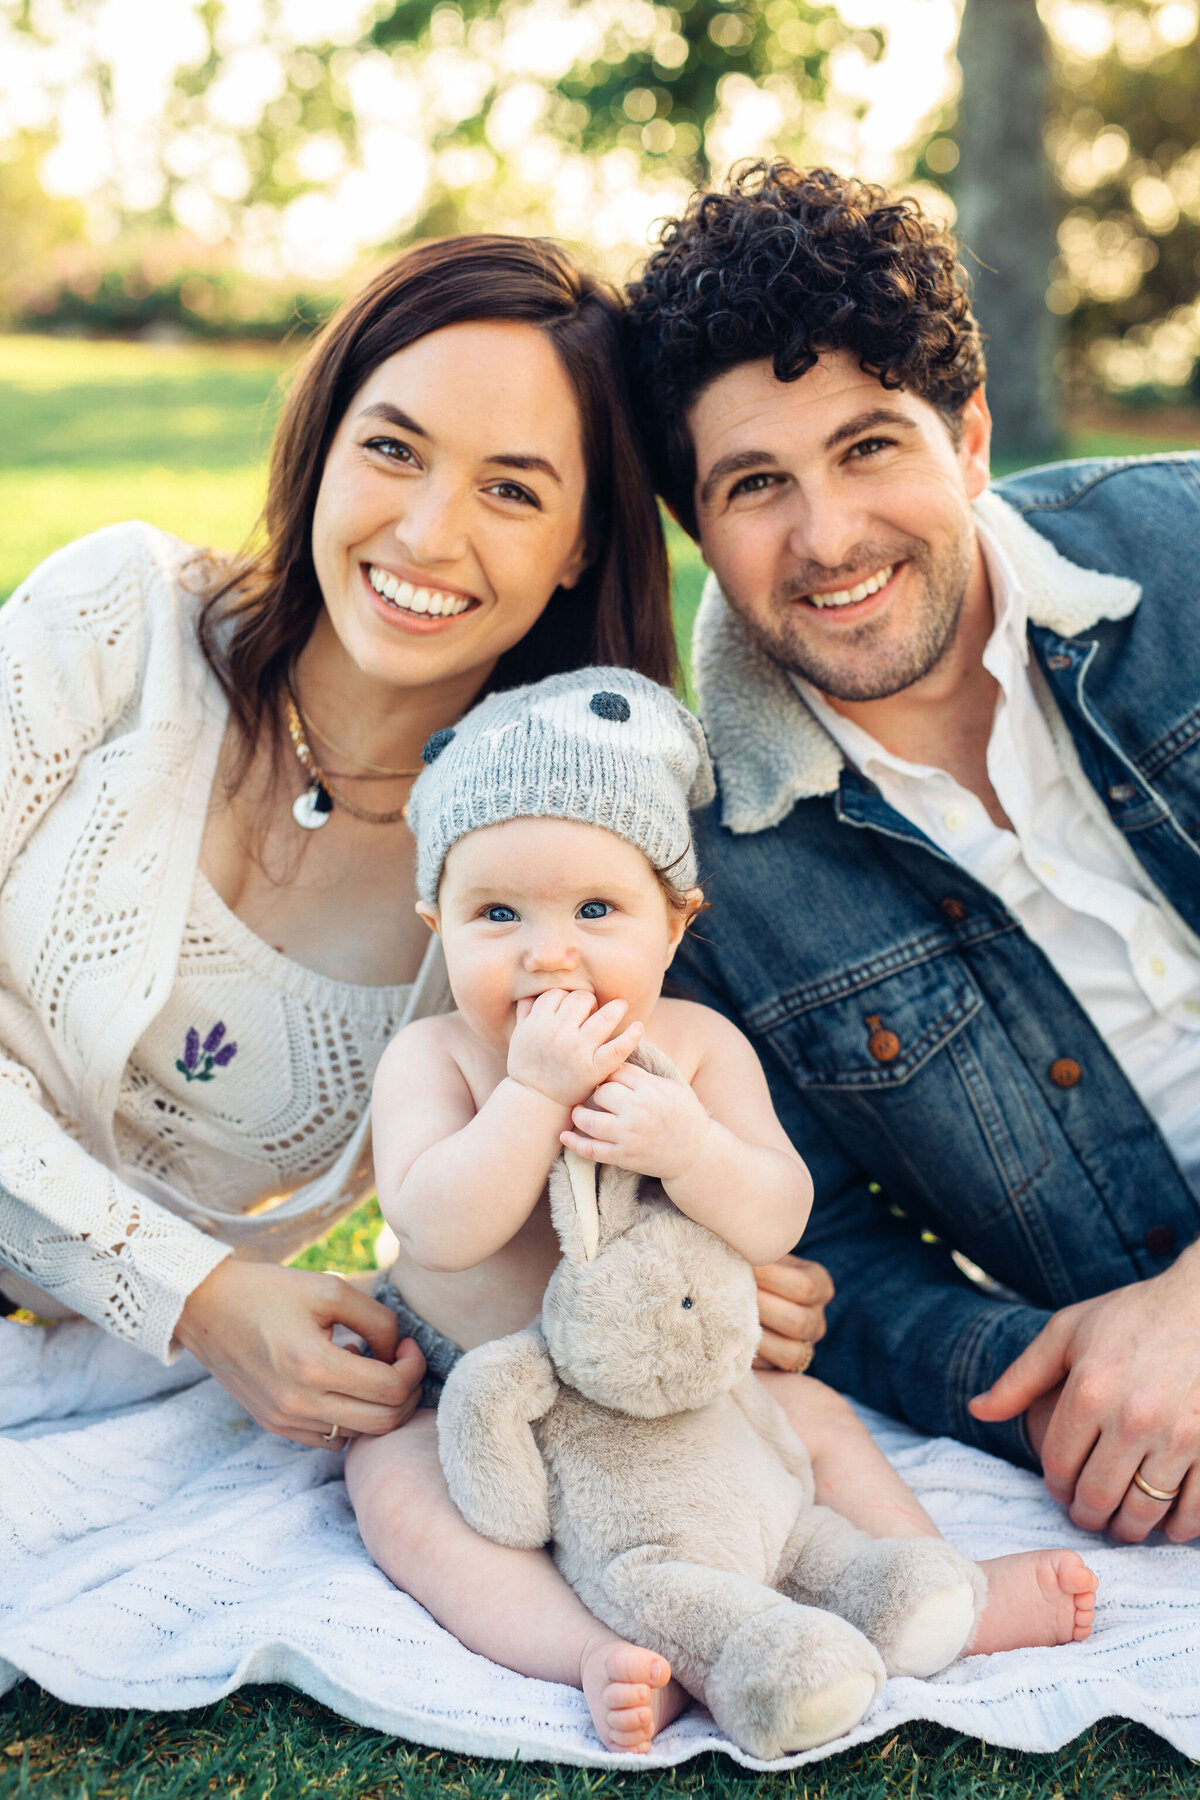 Family Portrait Photo Of Couple Sitting On The Ground With Their Baby In Los Angeles